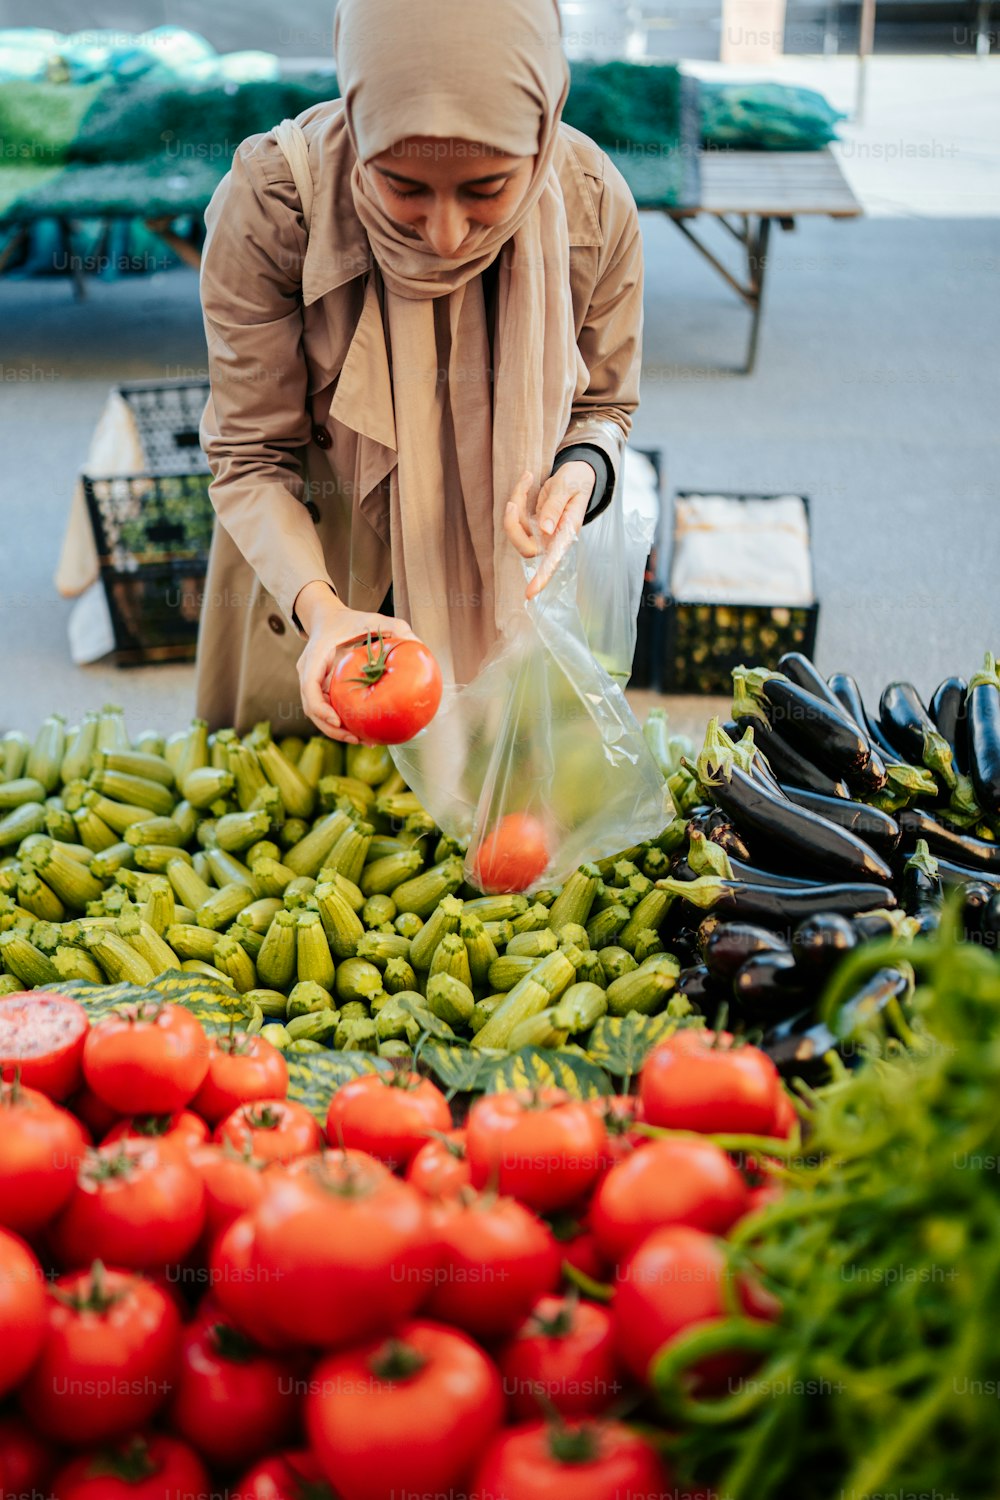 a woman in a hijab is shopping for vegetables